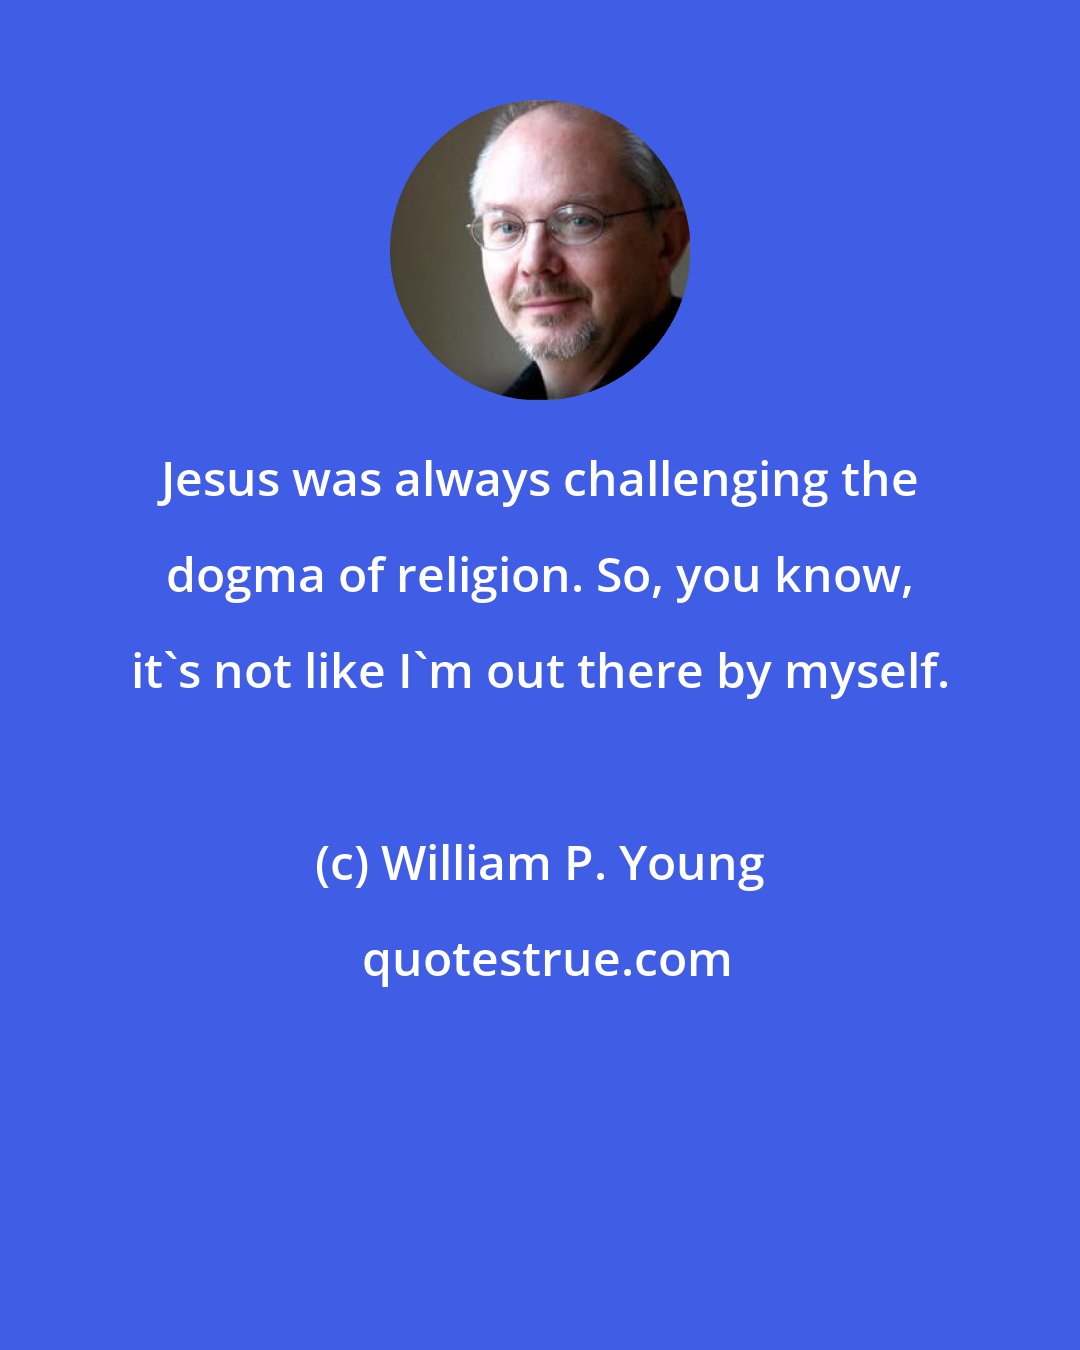 William P. Young: Jesus was always challenging the dogma of religion. So, you know, it's not like I'm out there by myself.